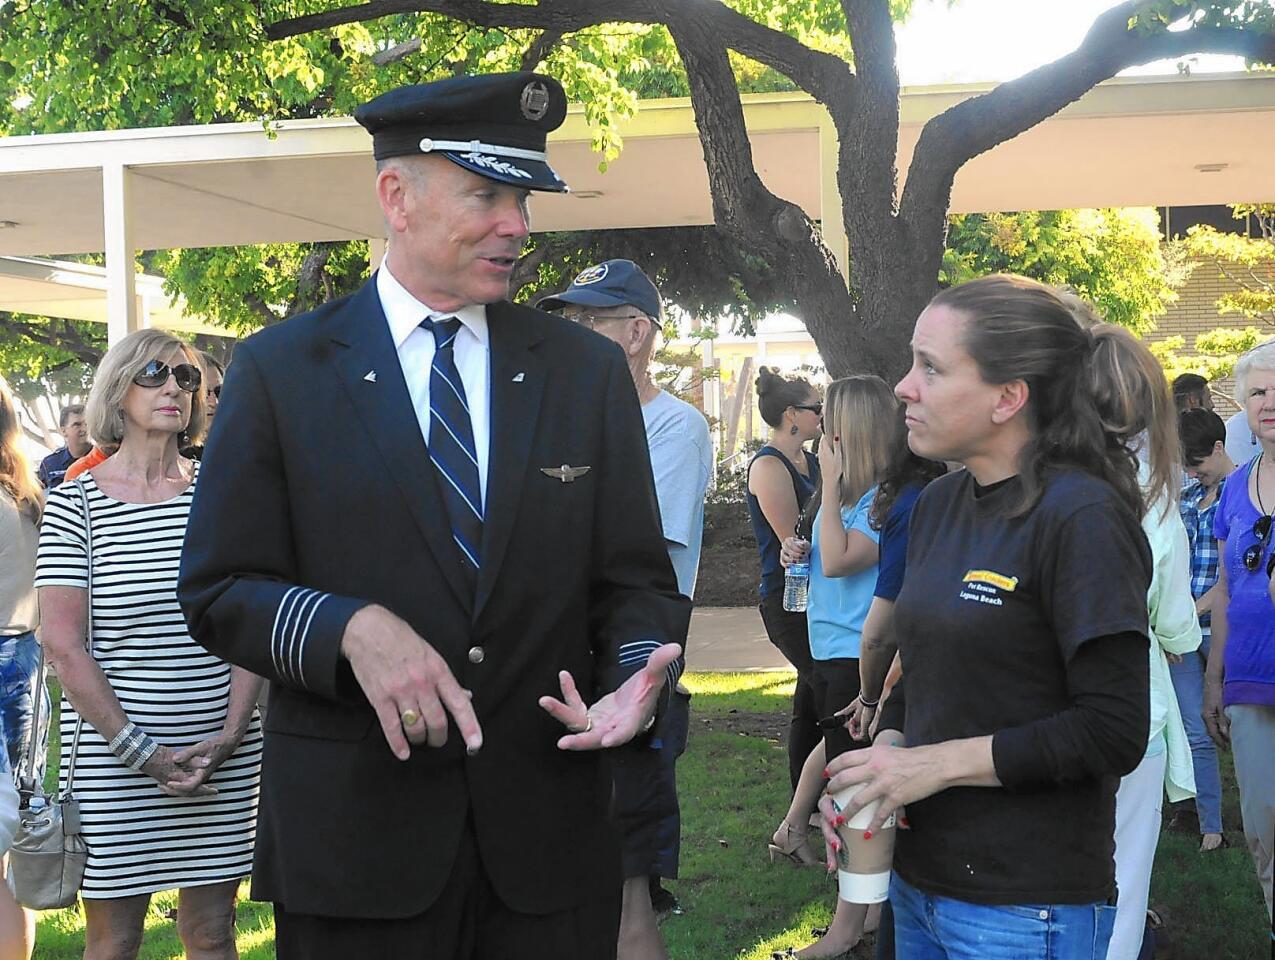 American Airlines pilot Jeff Diercksmeier talks with Johannah Falke at the Patriot Day ceremony Friday at Costa Mesa City Hall. A crowd of 150 came to the ceremony that recognized the 14th anniversary of the Sept. 11, 2001, terrorist attacks on the East Coast.